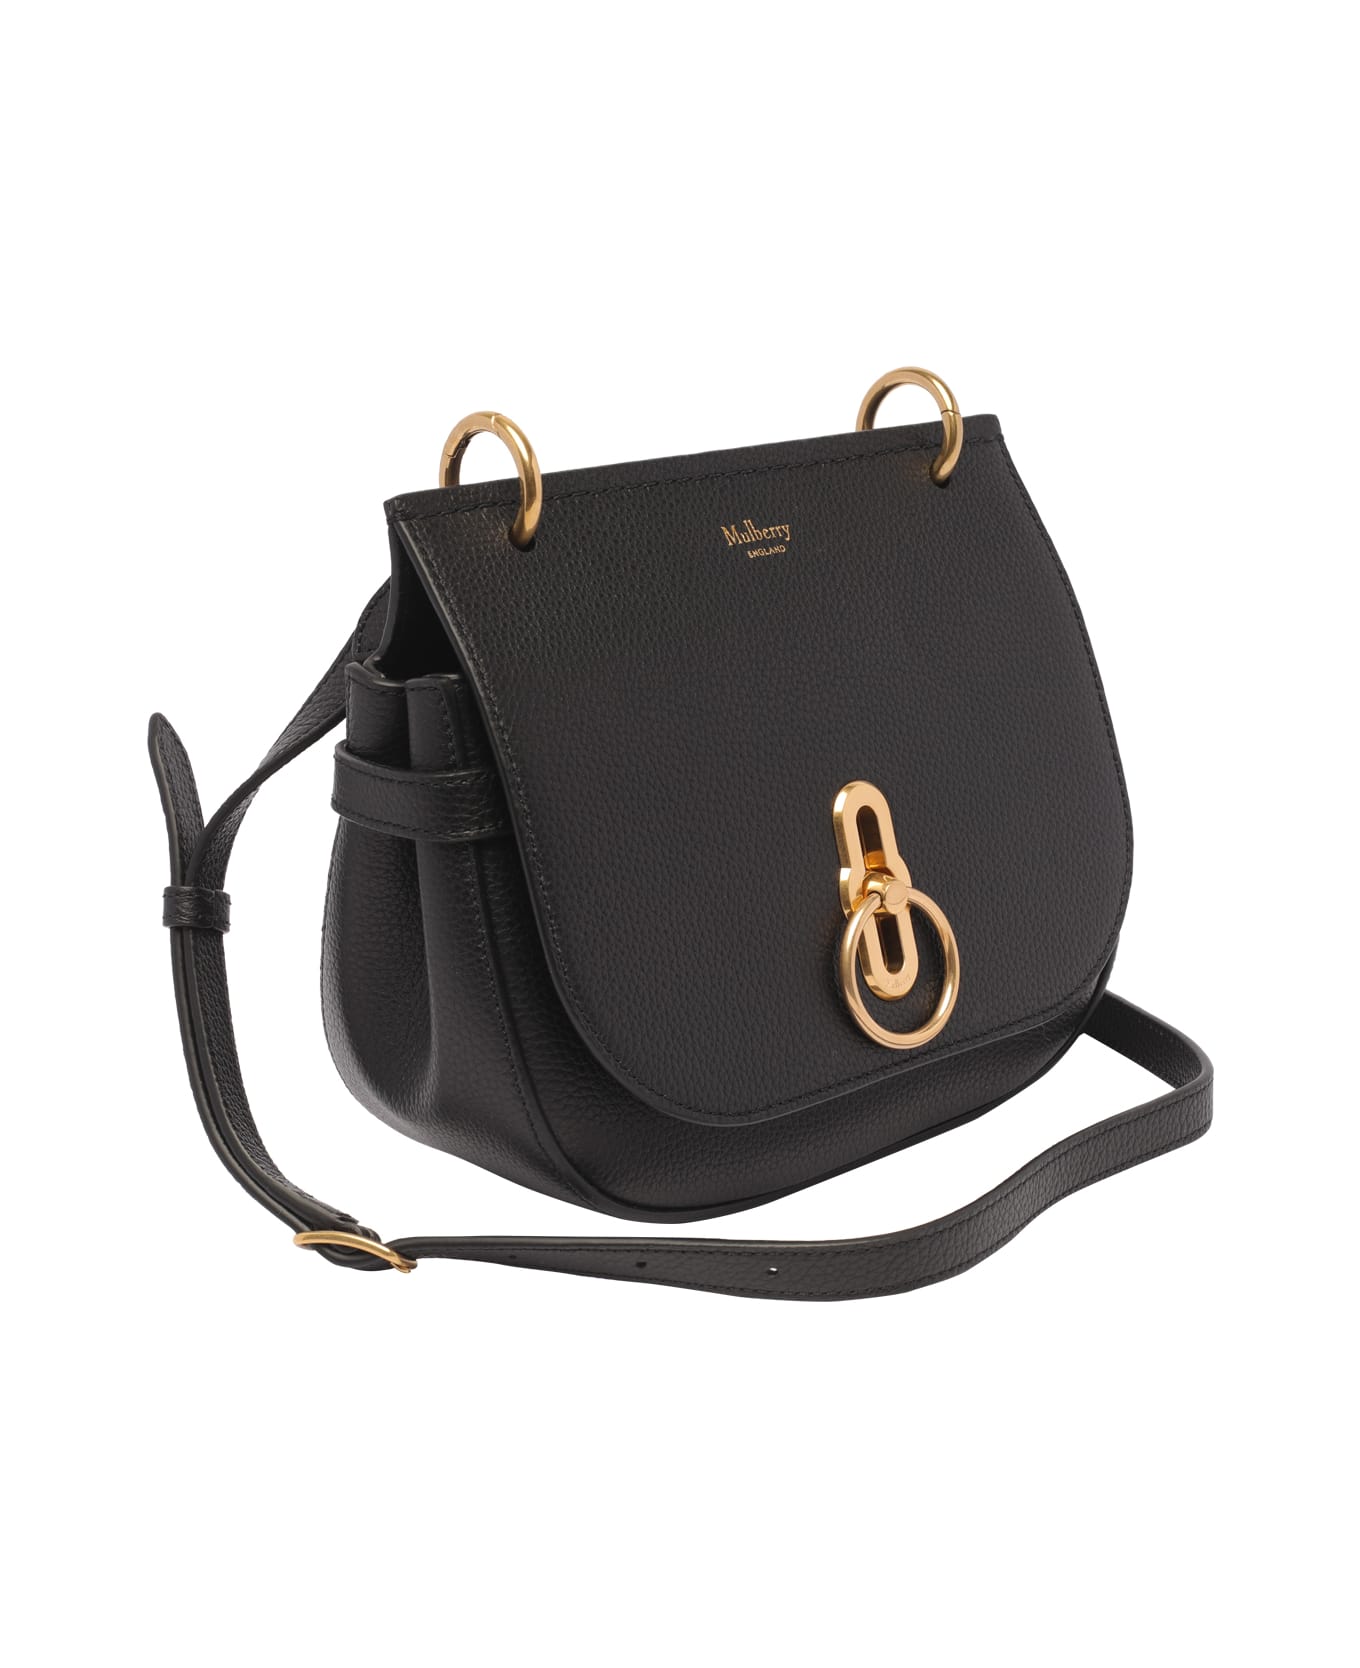 Mulberry Small Amberley Satchel Bag - Black トートバッグ